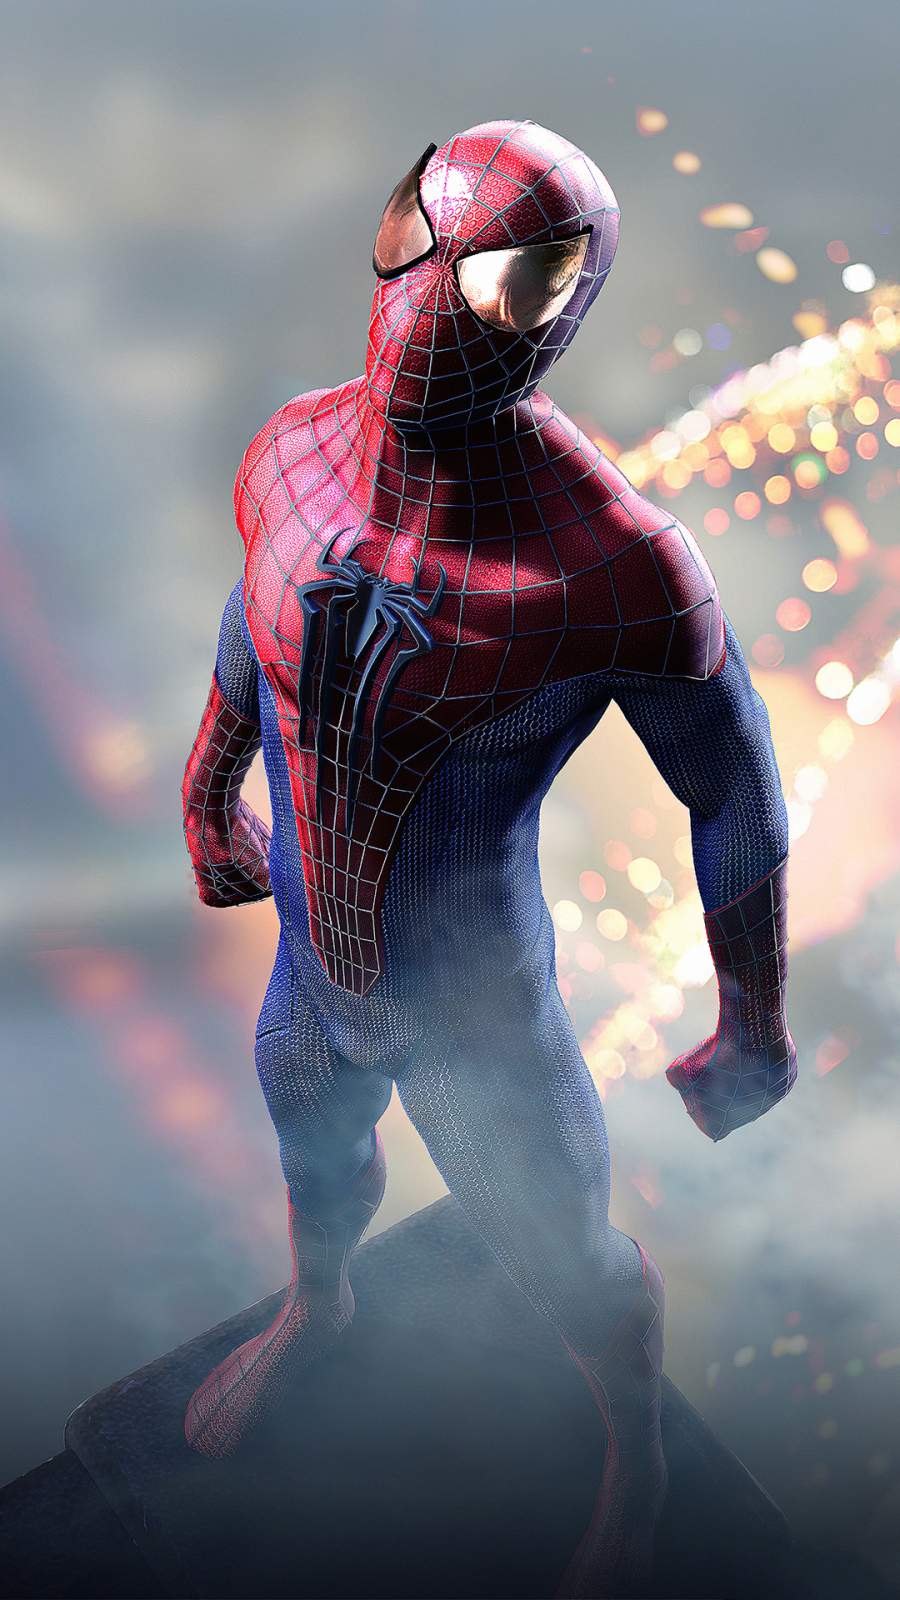 iOS 16 really complements these wallpapers  rSpidermanPS4